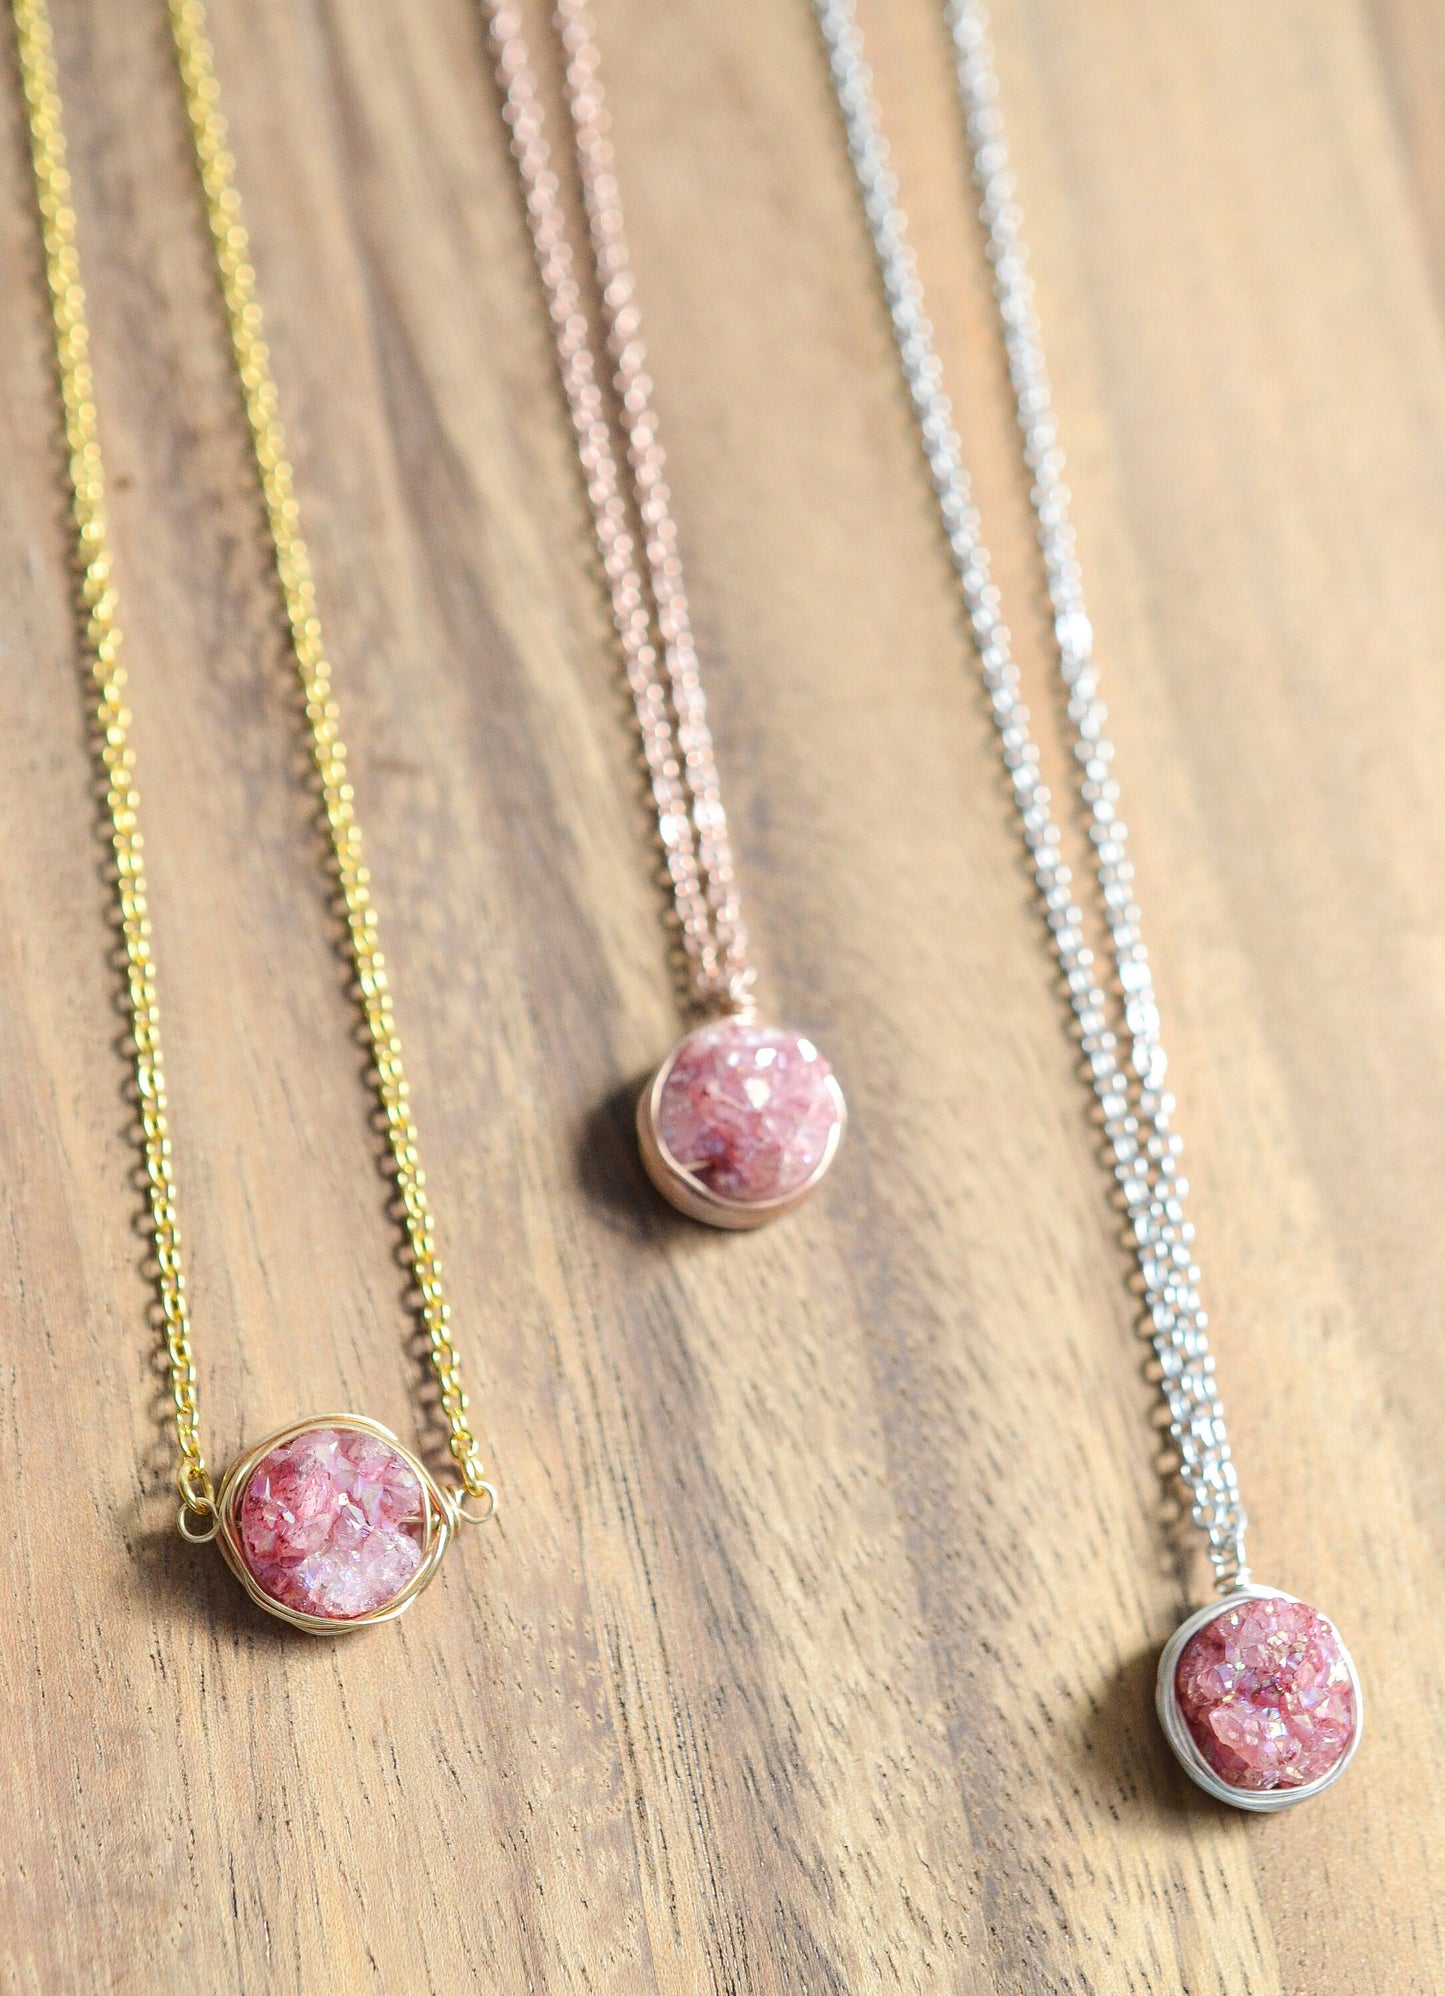 Wire Wrapped Pink Druzy Necklace // 16K Gold Plated, Silver, or Rose Gold Druzy Necklace // Natural Druzy Necklace // Gift for Her